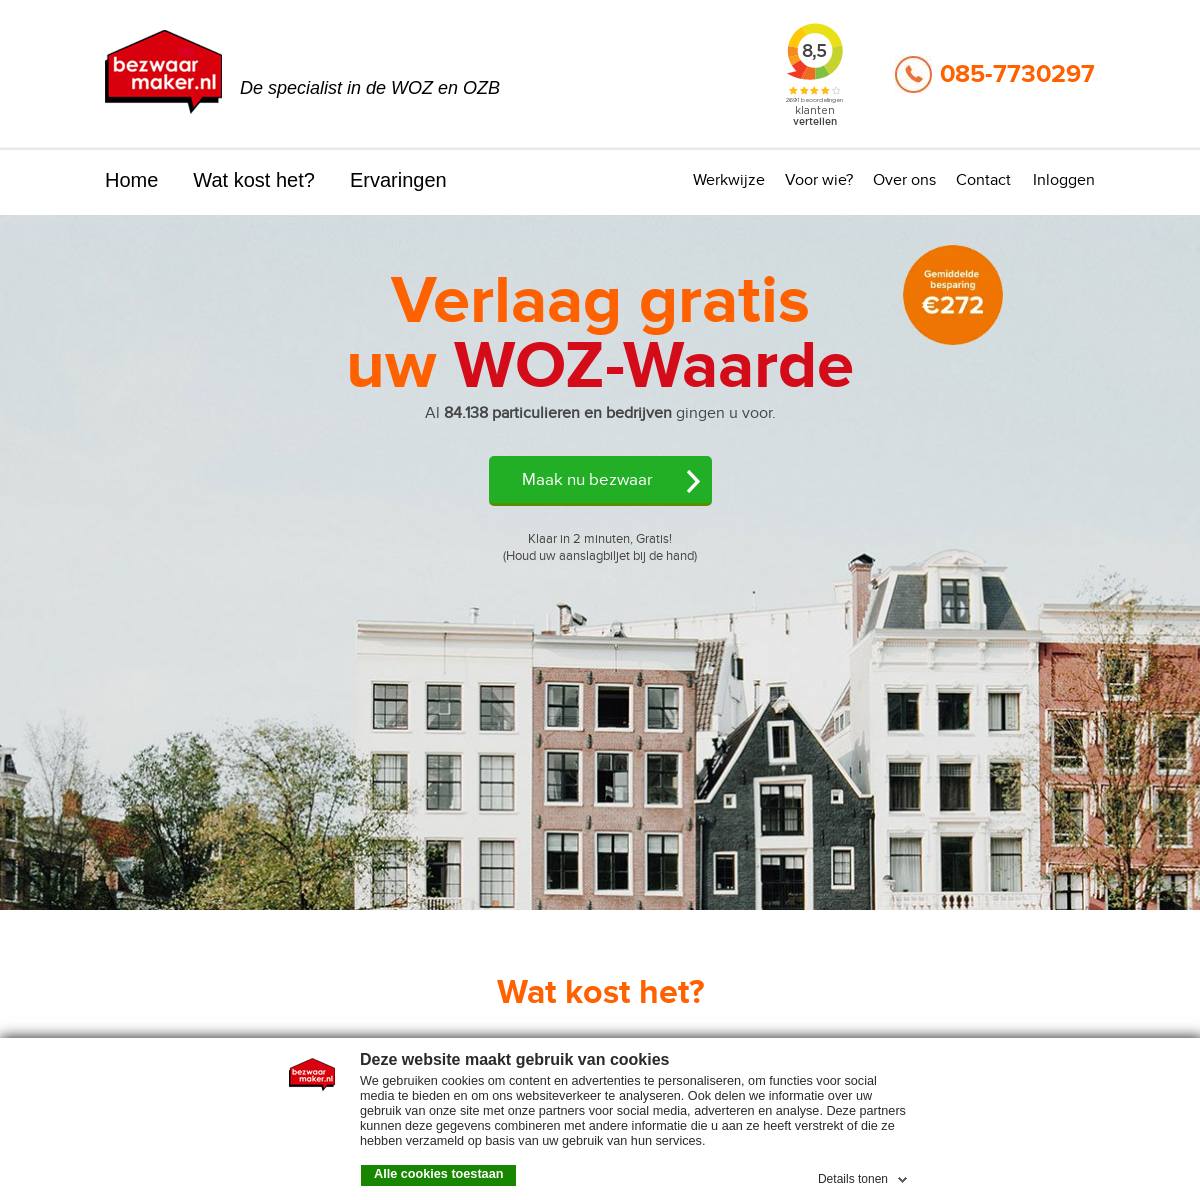 A complete backup of bezwaarmaker.nl